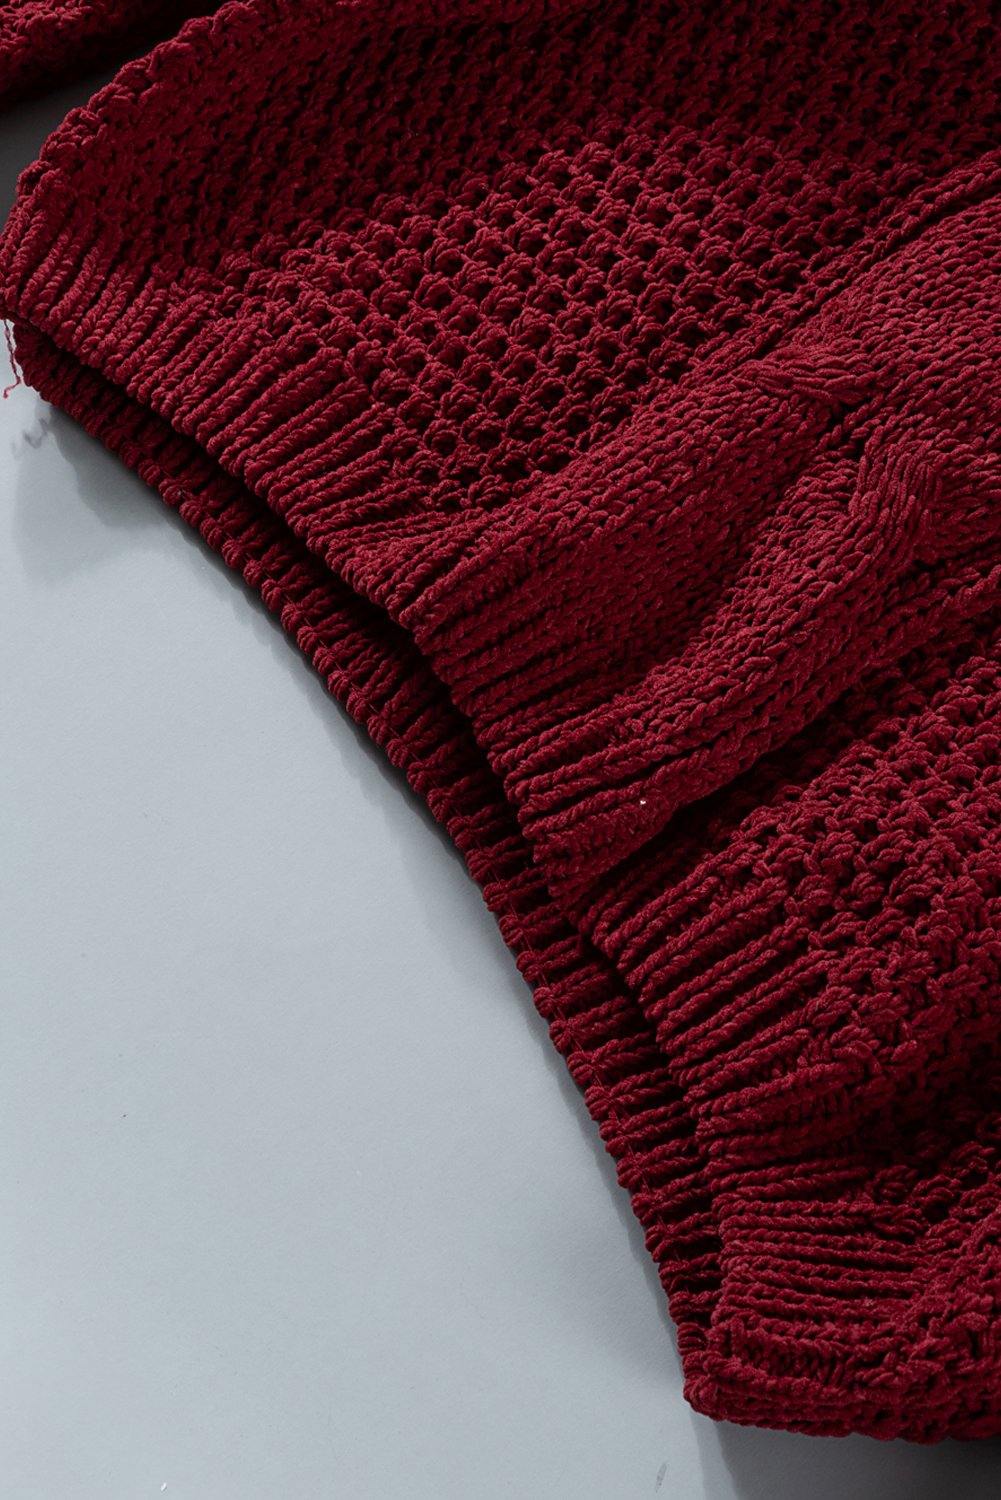 Solid Turtleneck Cable Knit Pullover Sweater - L & M Kee, LLC